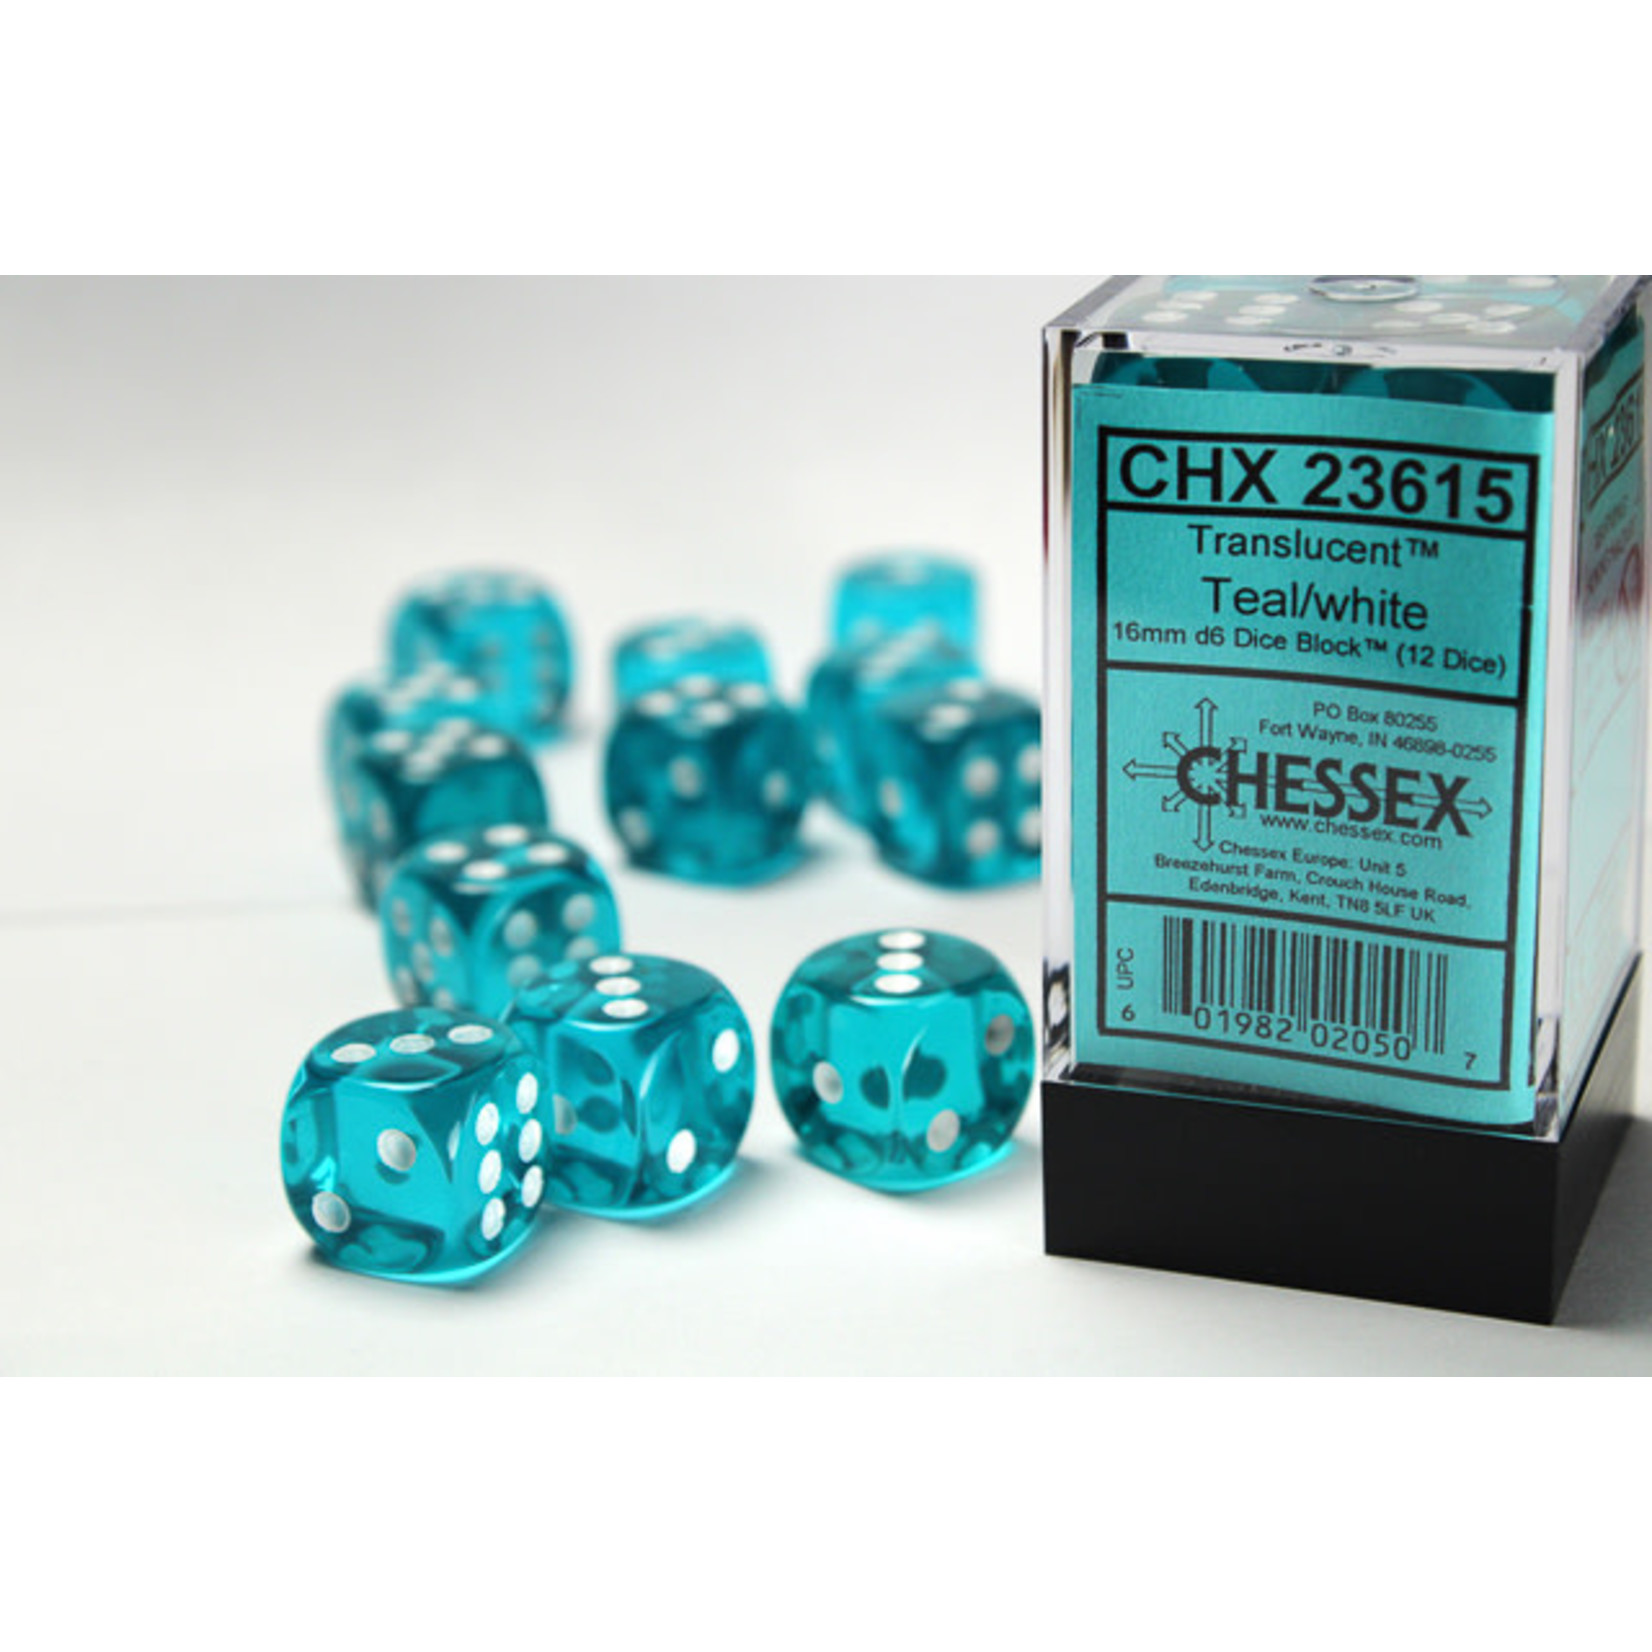 Chessex Dice 16mm 23615 12pc Translucent Teal/White